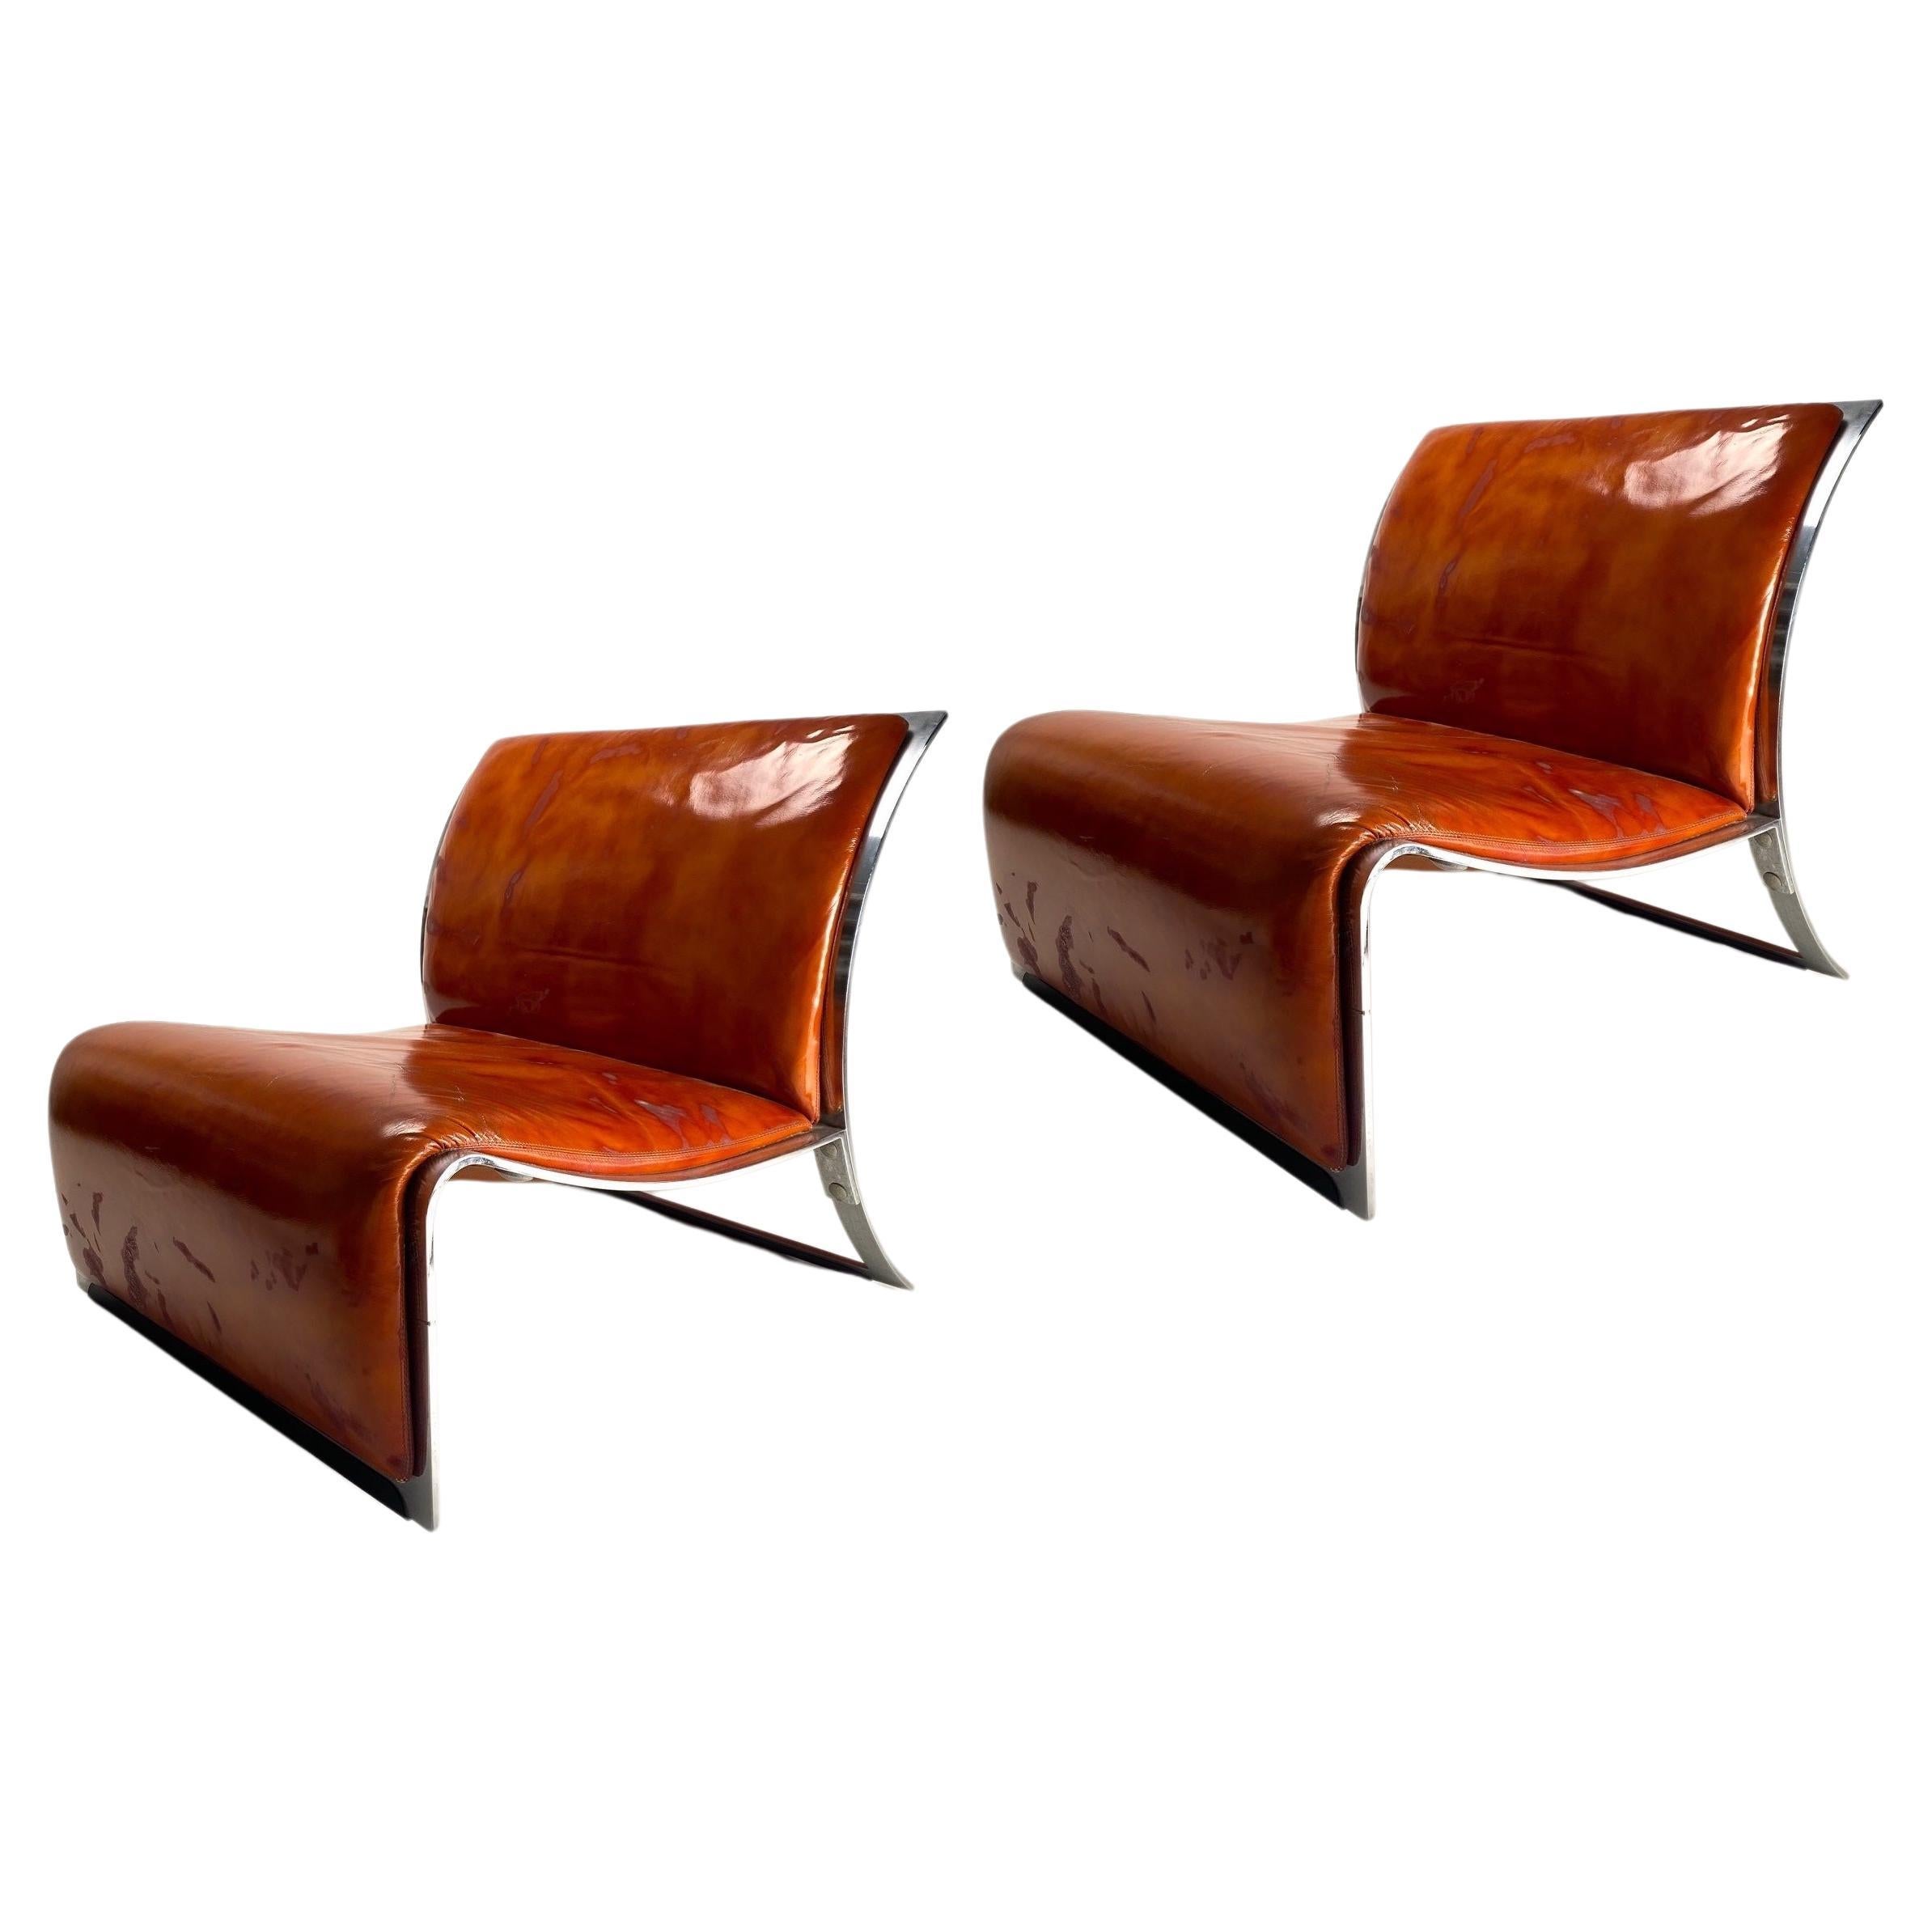 Vittorio Introini  Pair of chromed metal and leather armchairs for Saporiti